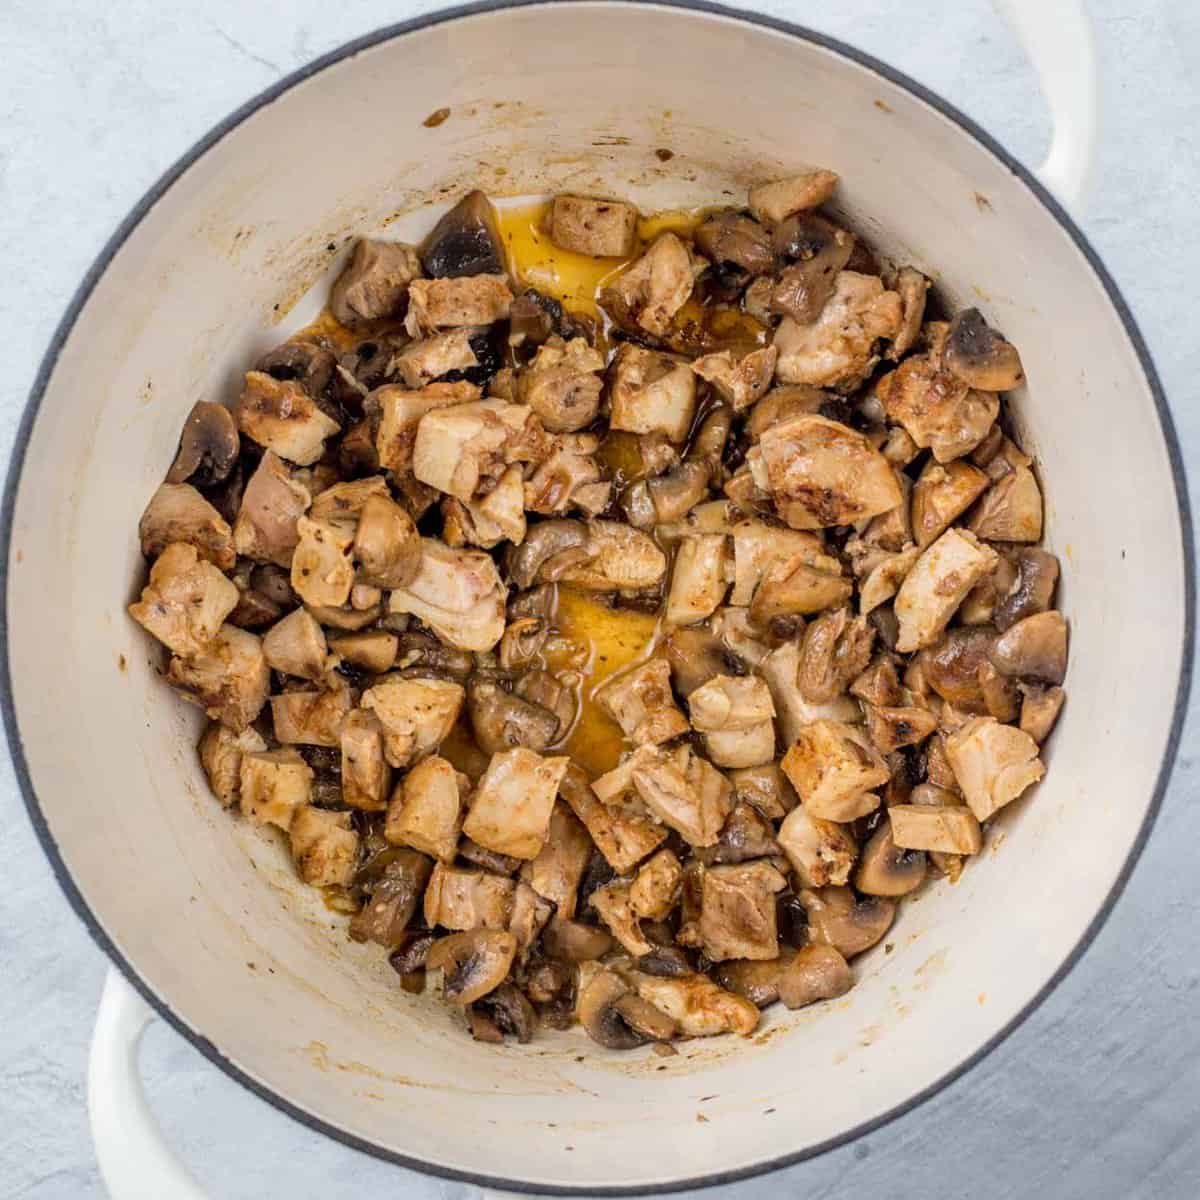 A pot with the cooking chicken and mushrooms.